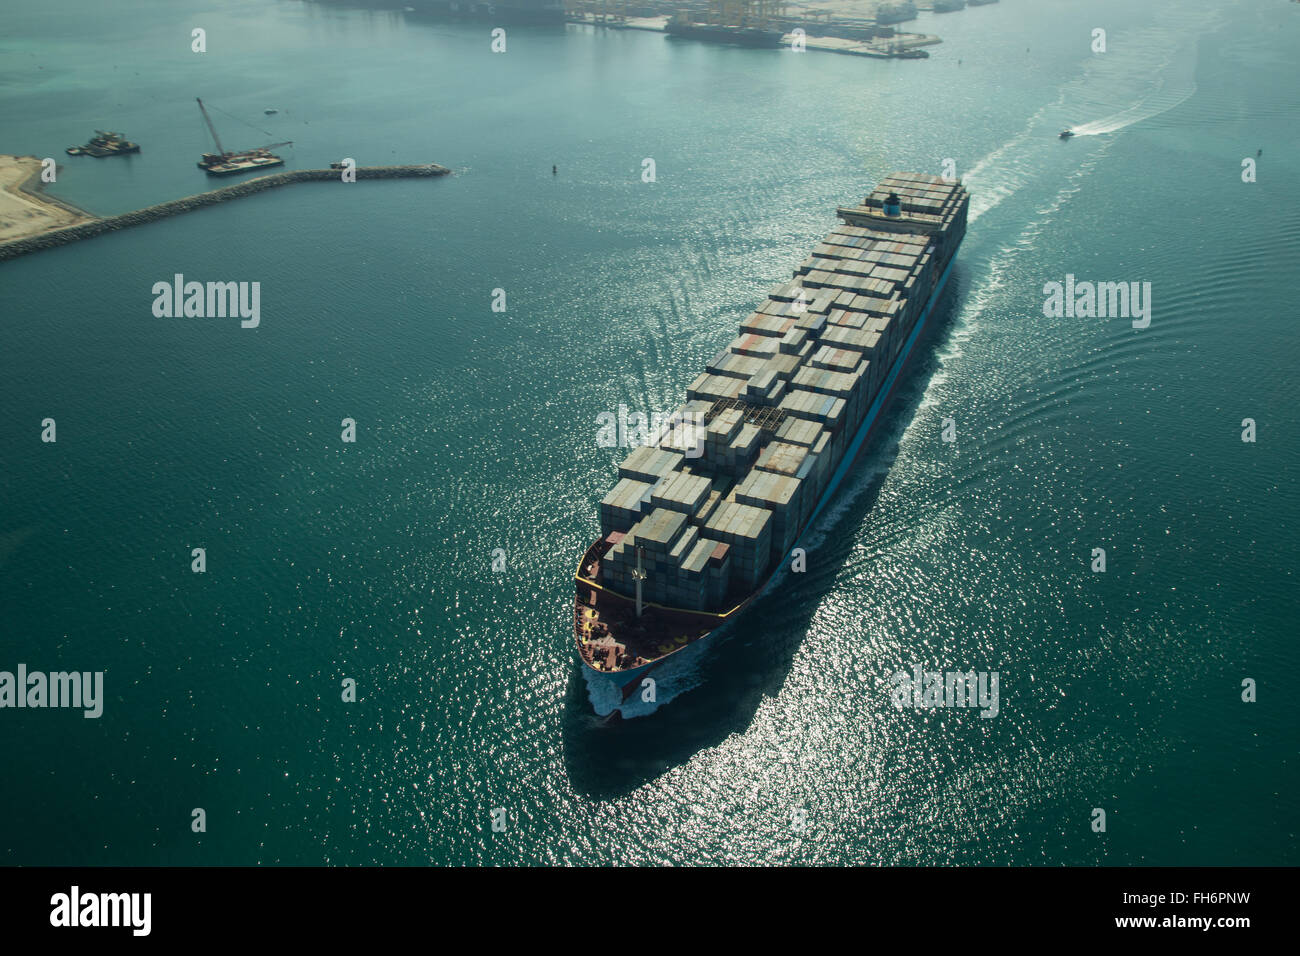 Aerial view of a cargo container ship in Dubai, UAE. Stock Photo